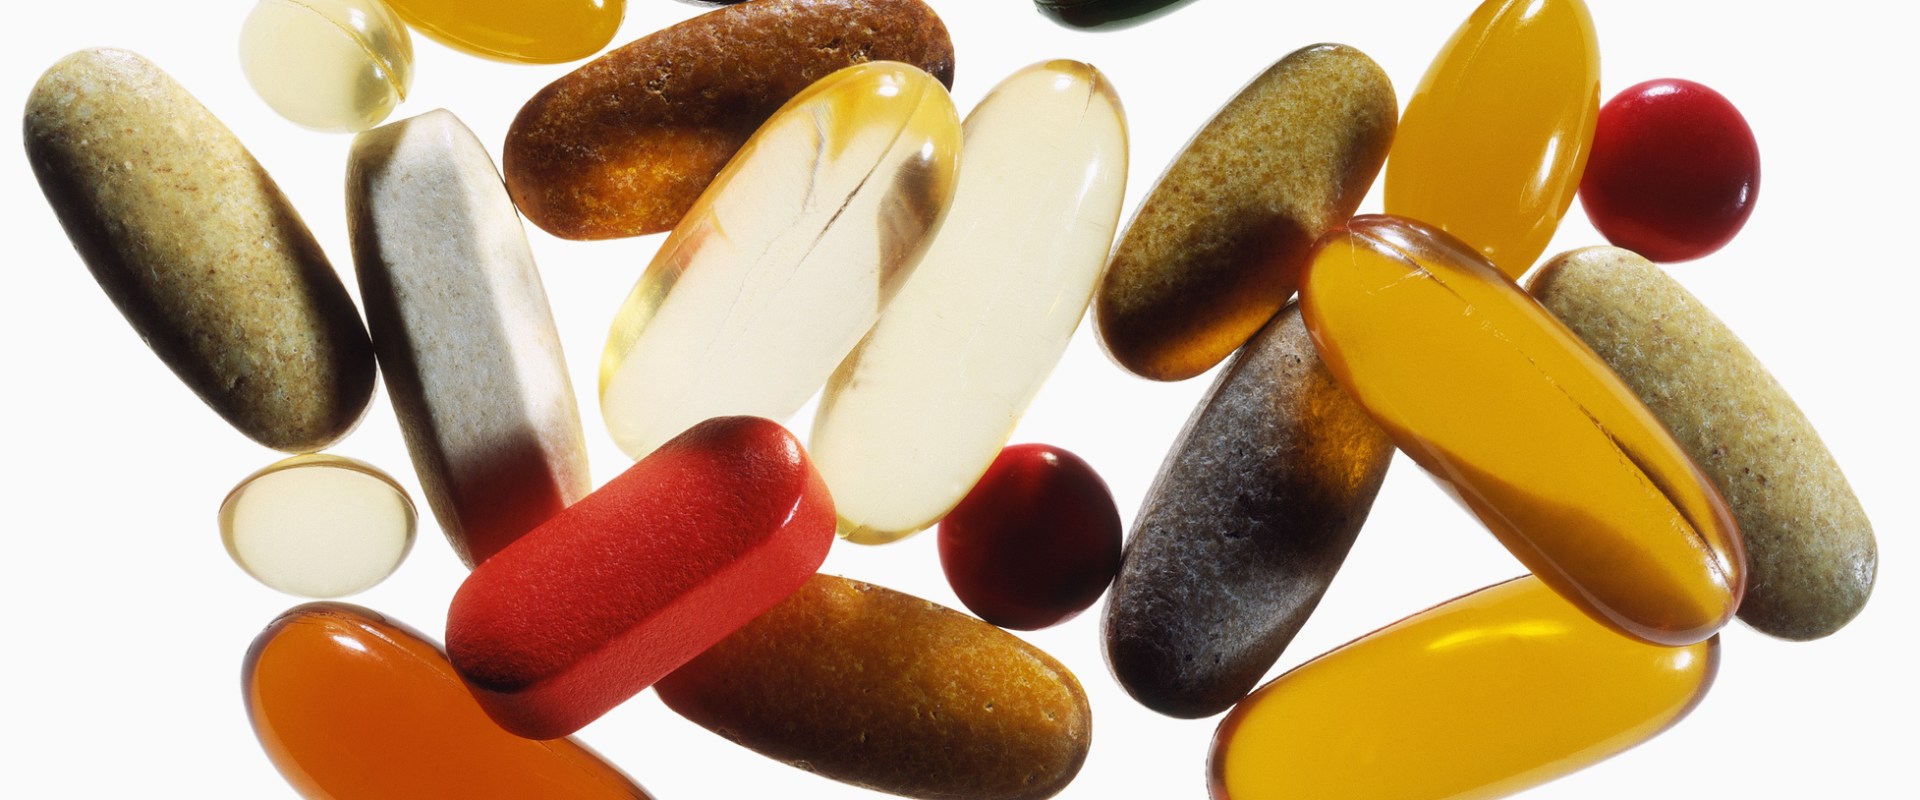 The Right Way to Take Nutritional Supplements for Optimal Health